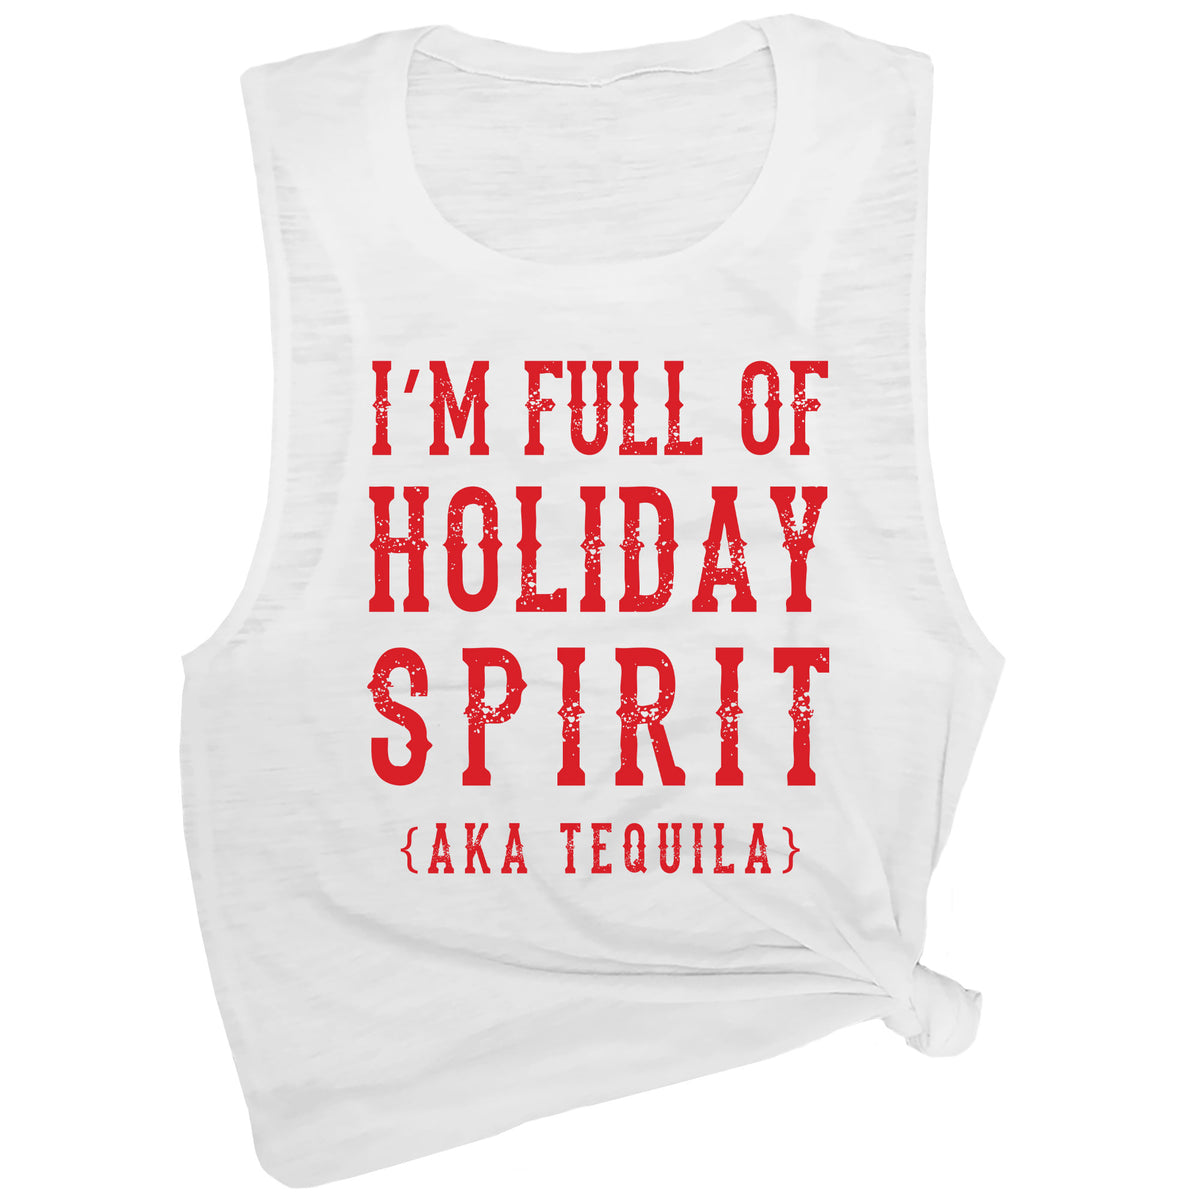 I'm Full of Holiday Spirit AKA Tequila Muscle Tee